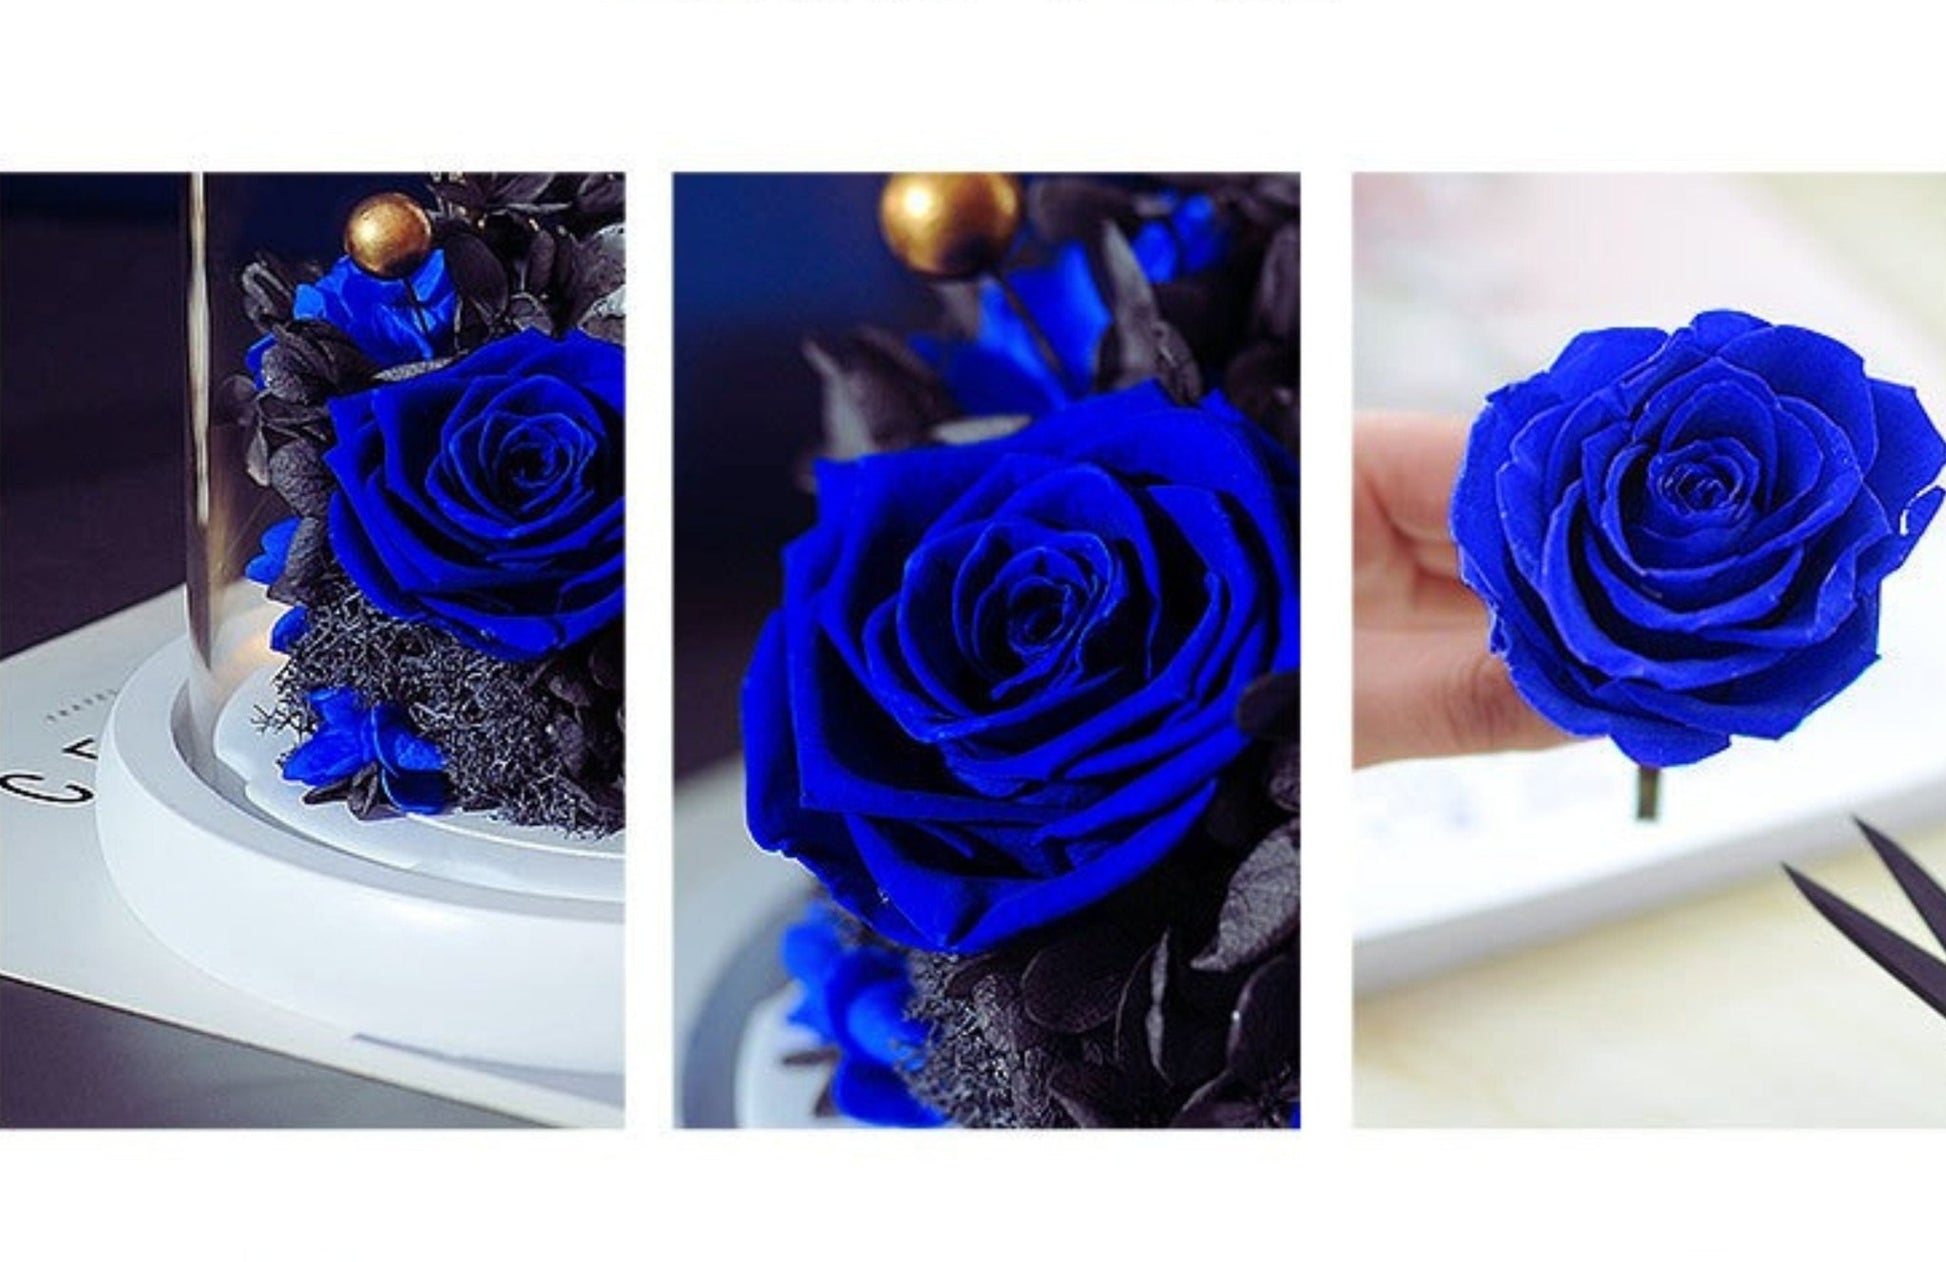 Space Themed Eternal Roses - Space Mesmerise - Space Gifts | Lamps | Statues | Home Decor